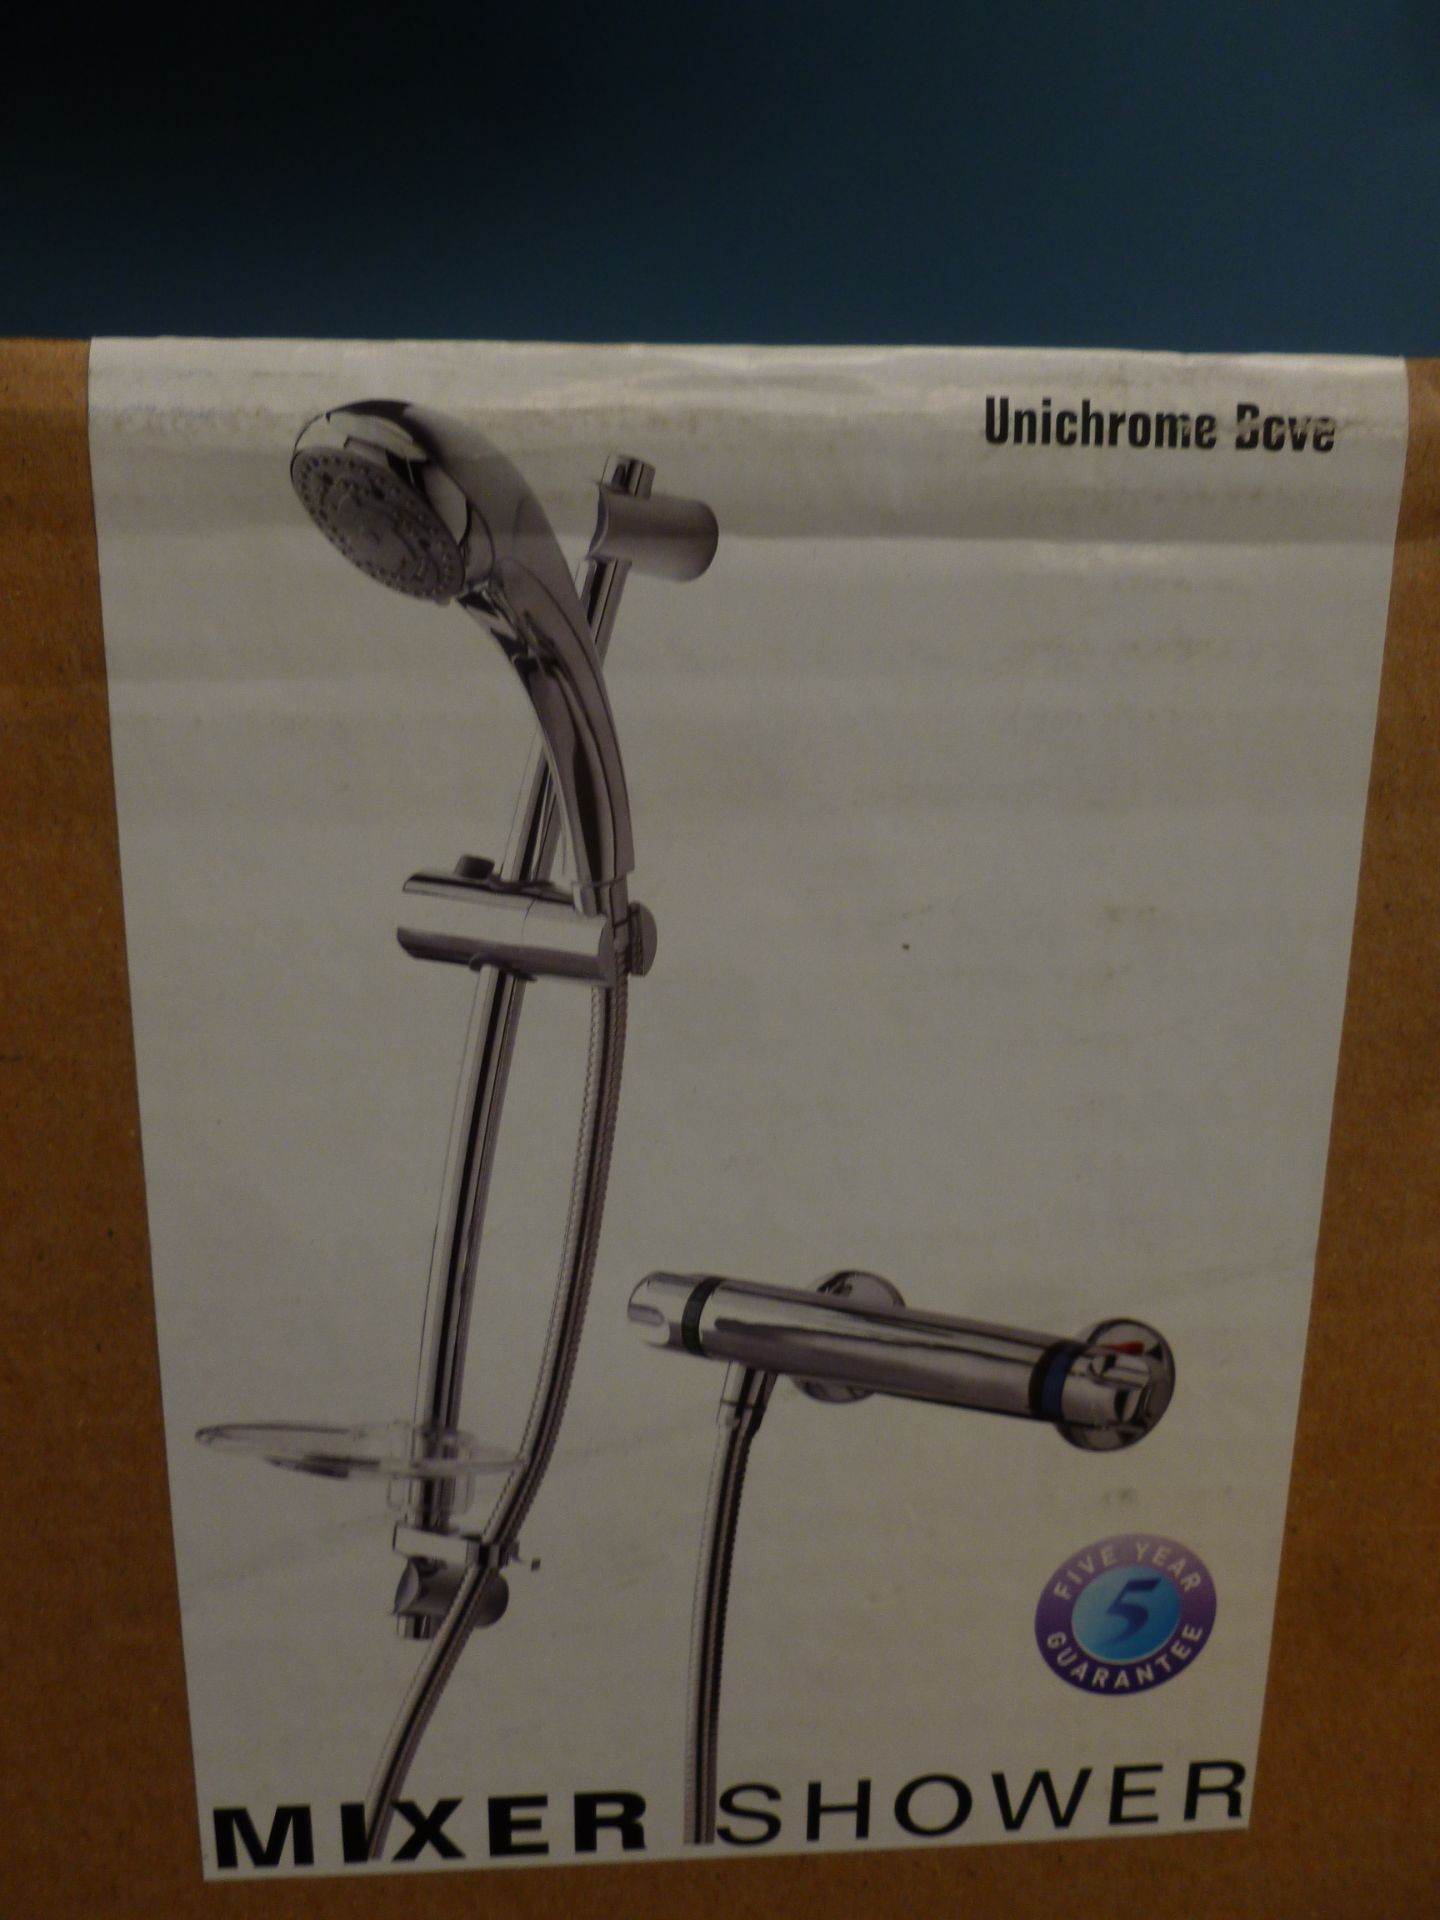 Triton Unichrome Dove Thermostaic Bar Mixer Shower. New, sealed and boxed.